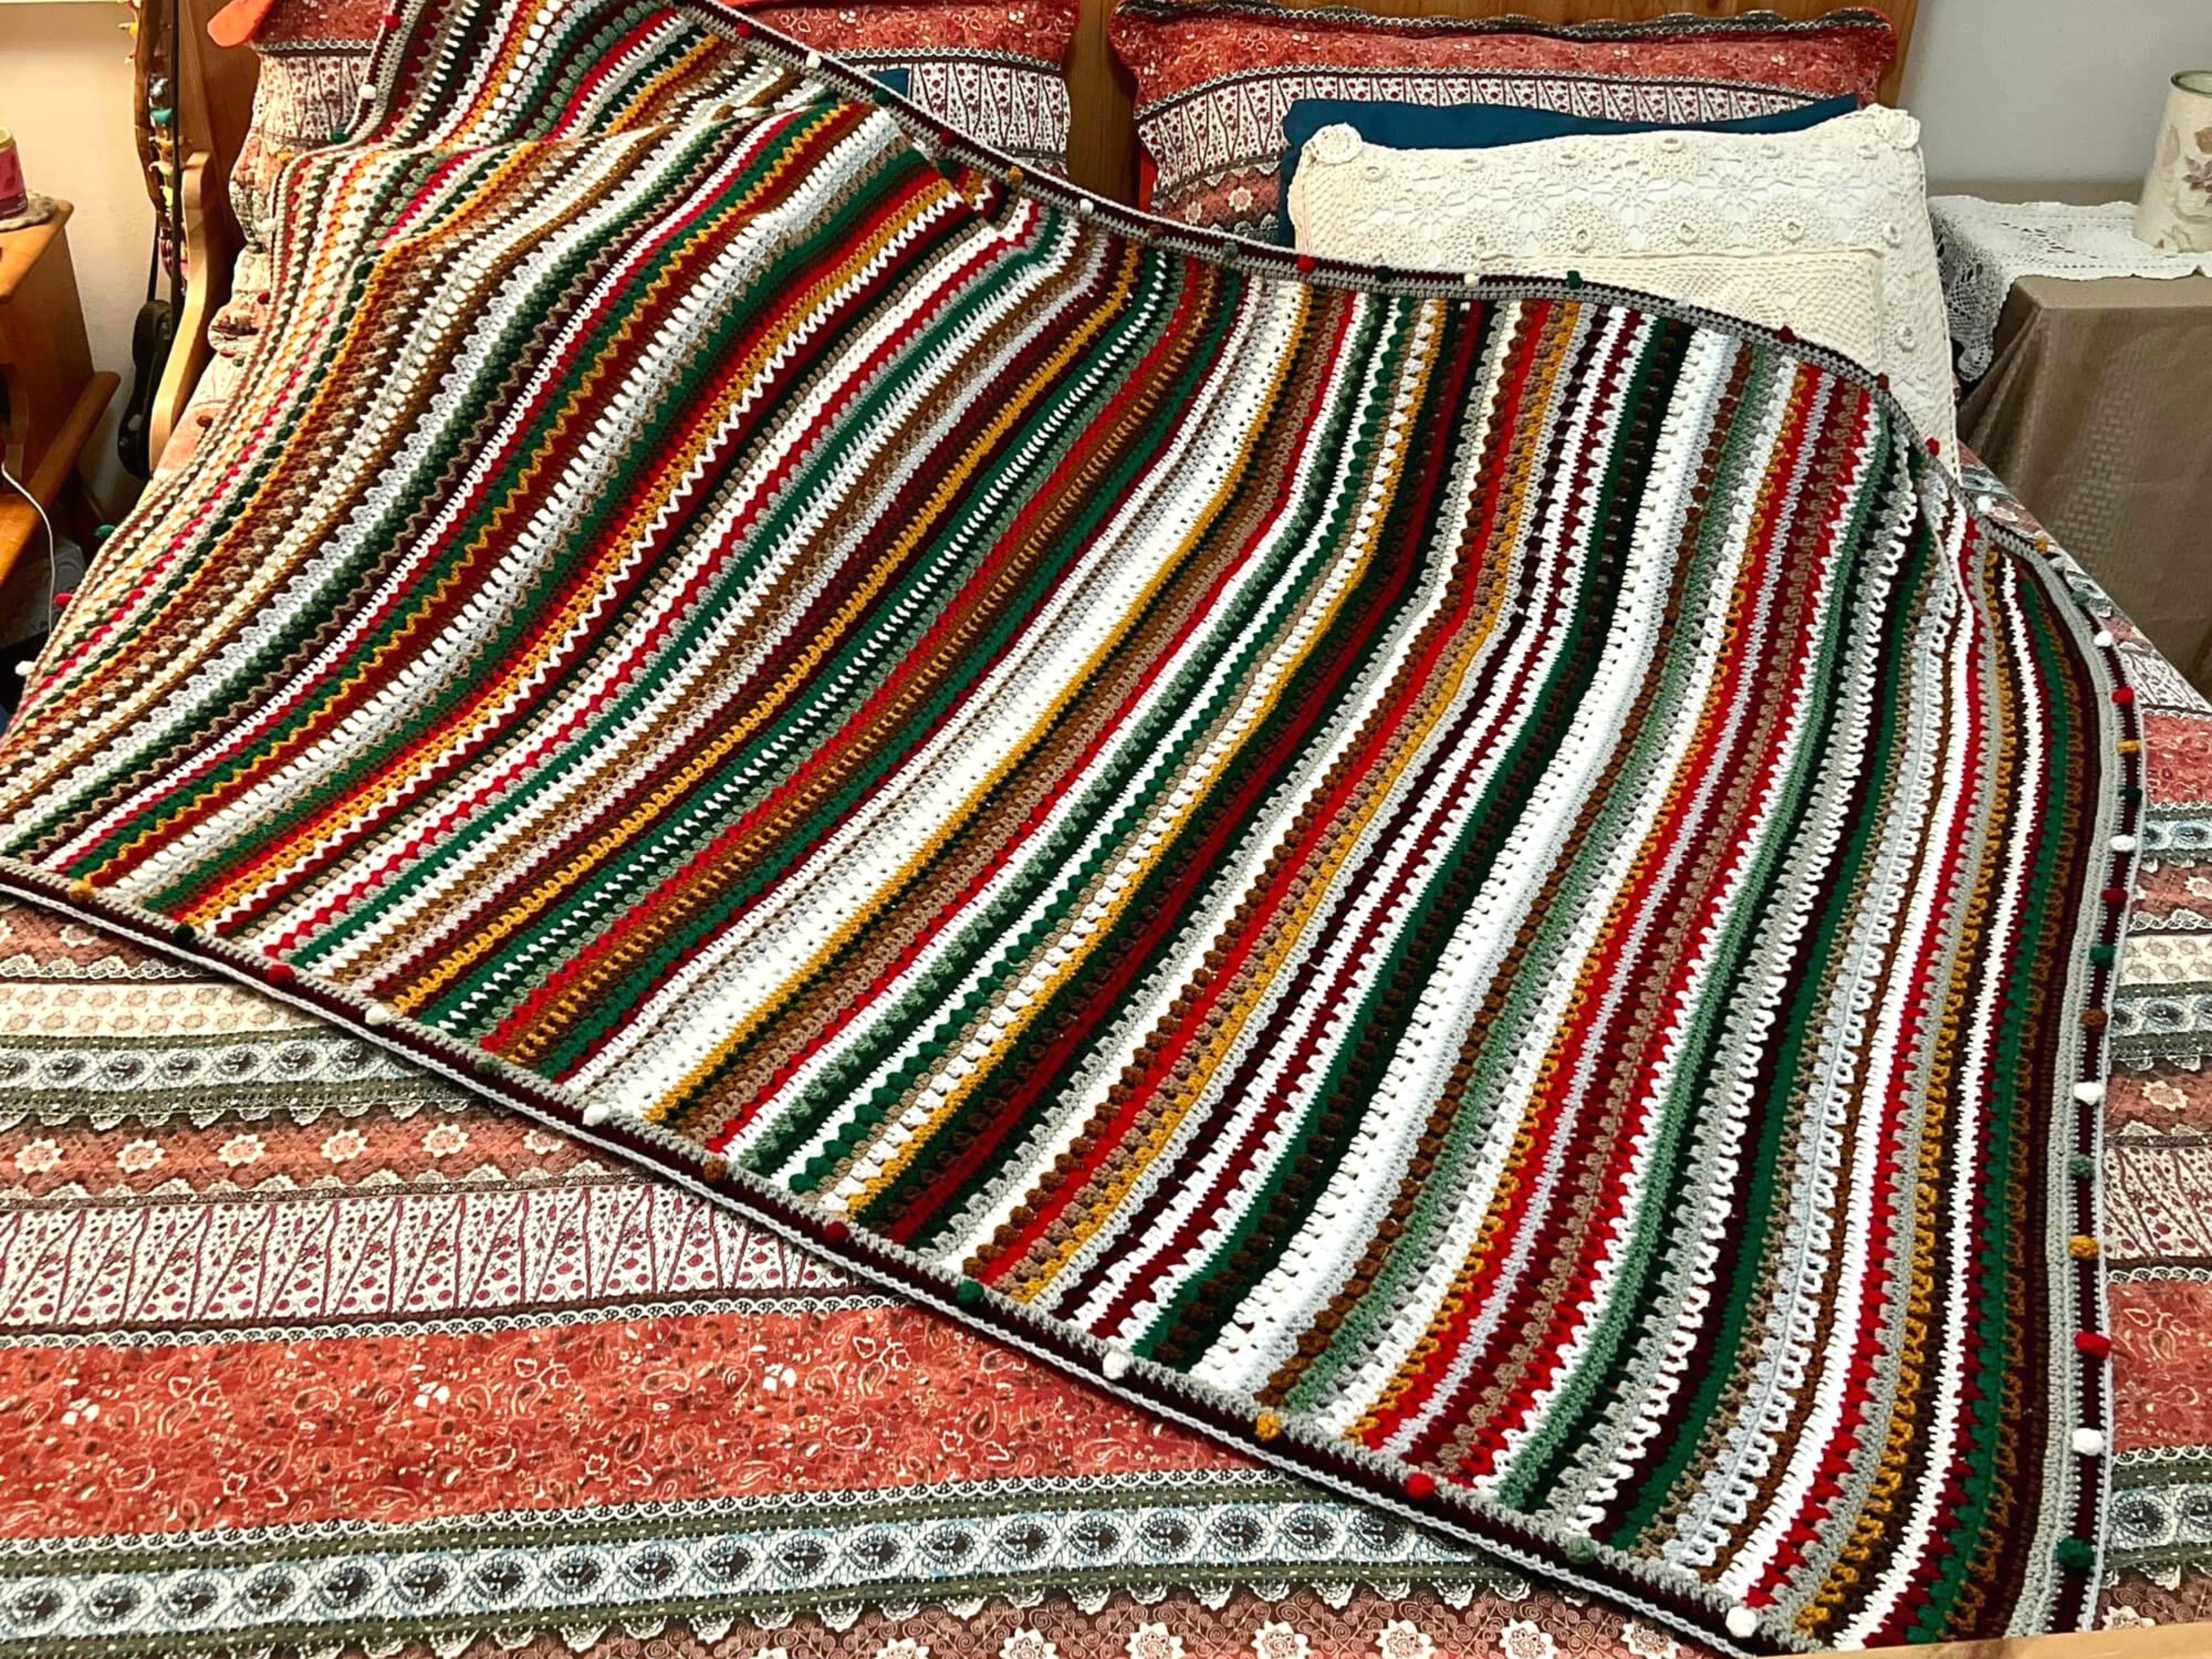 Blanket made with Christmas yarn pack